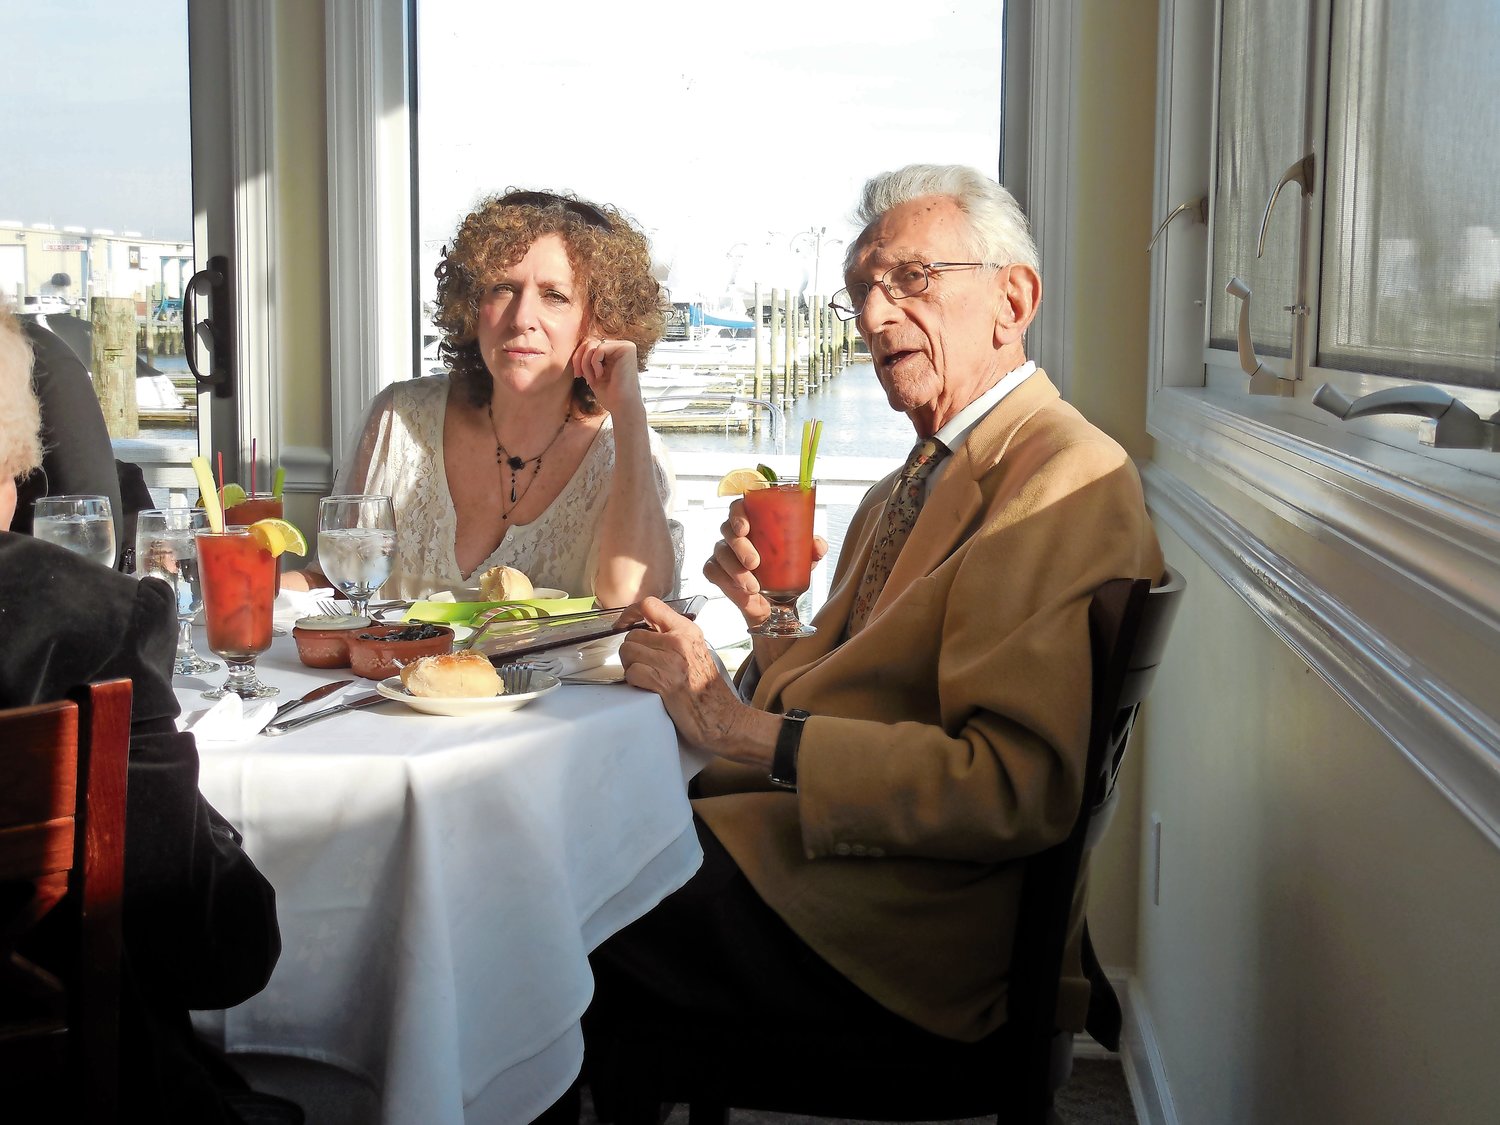 Alan Nemser, a 66-year Merrick resident, died on June 10 at the age of 106. He is pictured here at his 100th birthday celebration, with his daughter Erica Nemser-Crowley, enjoying a bloody Mary.